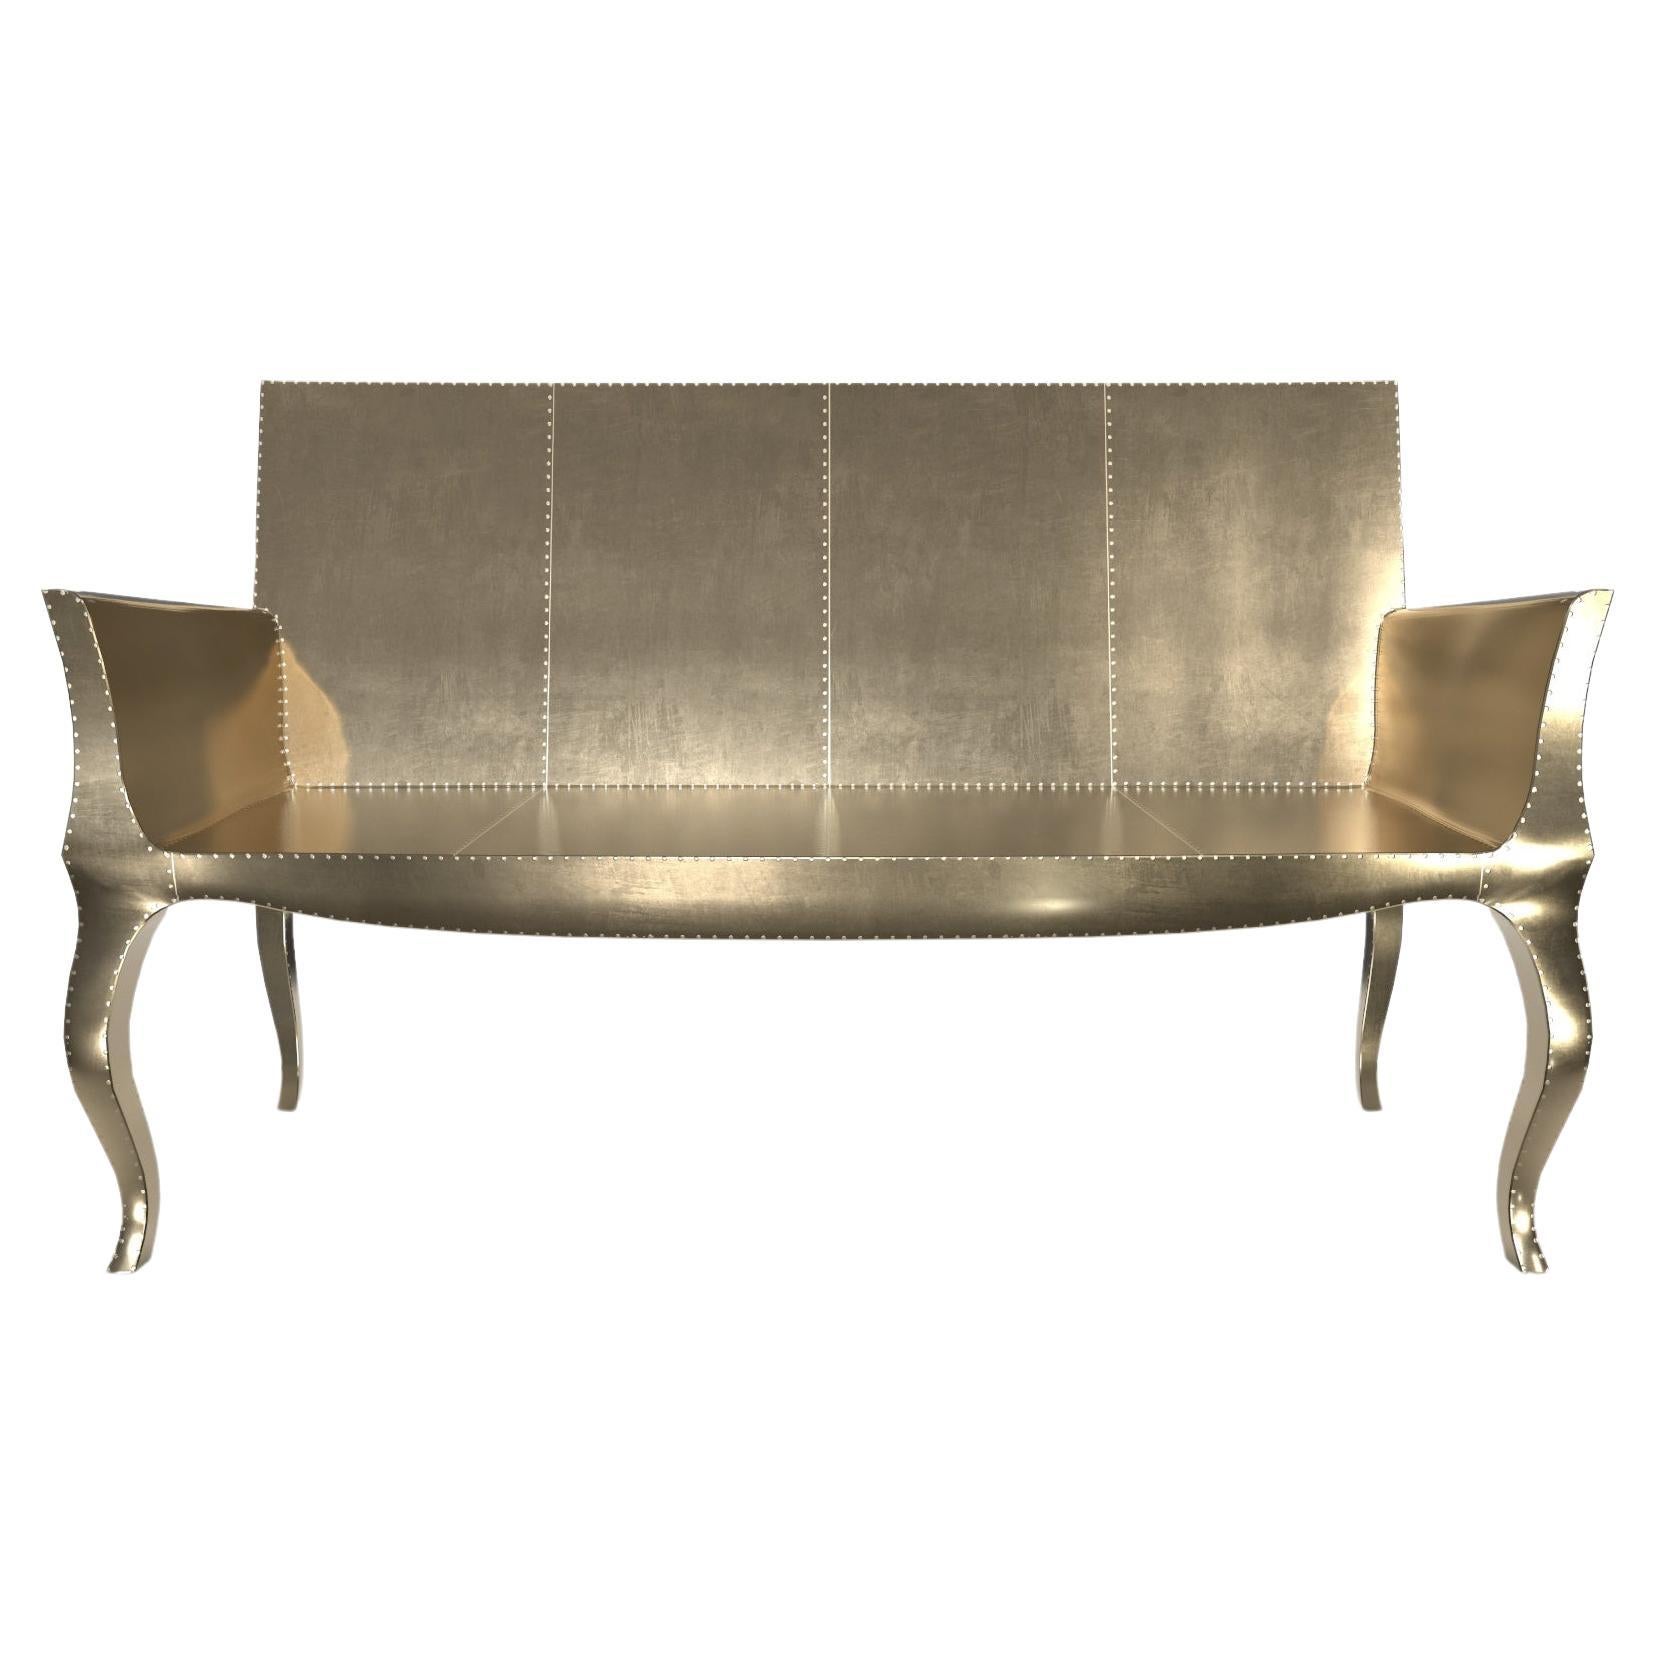 Louise Settee Art Deco Daybeds in Smooth Copper by Paul Mathieu For S Odegard  For Sale 5